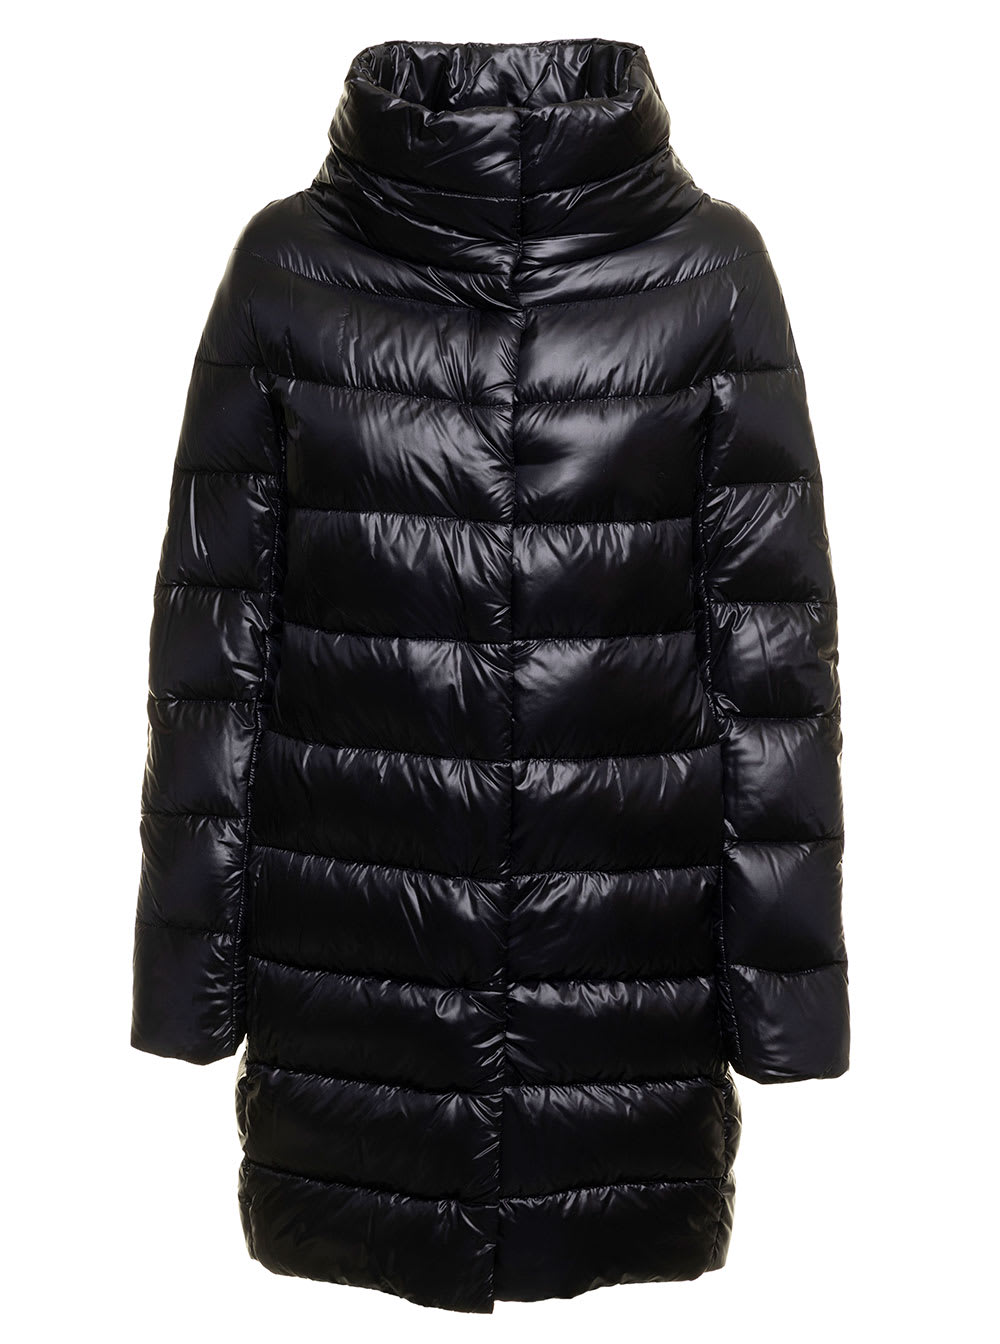 Herno Woman's Dora Ultralight Quilted Black Nylon Long Down Jacket